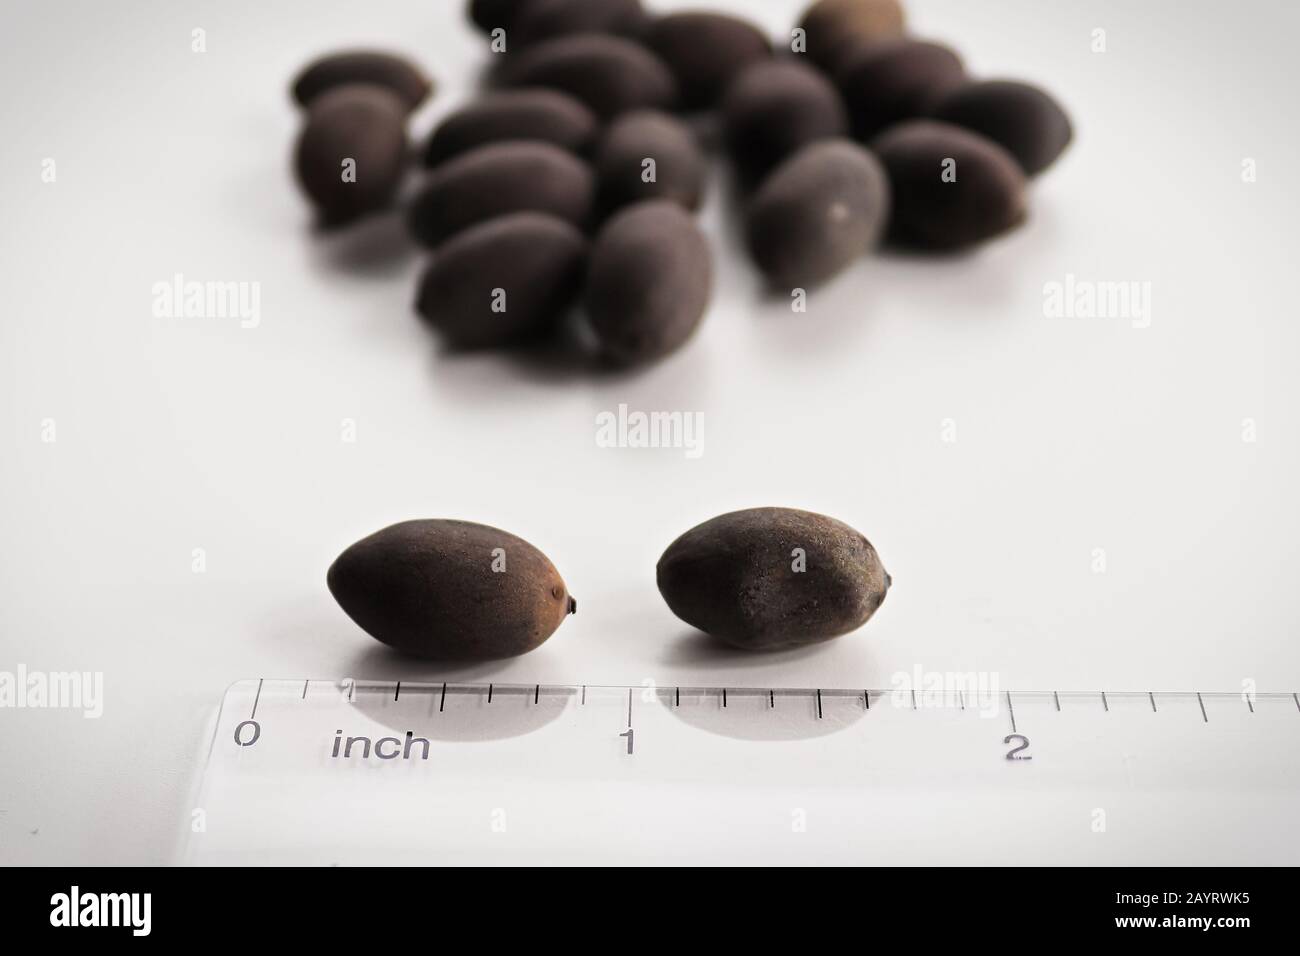 closeup of lotus seeds against a ruler Stock Photo